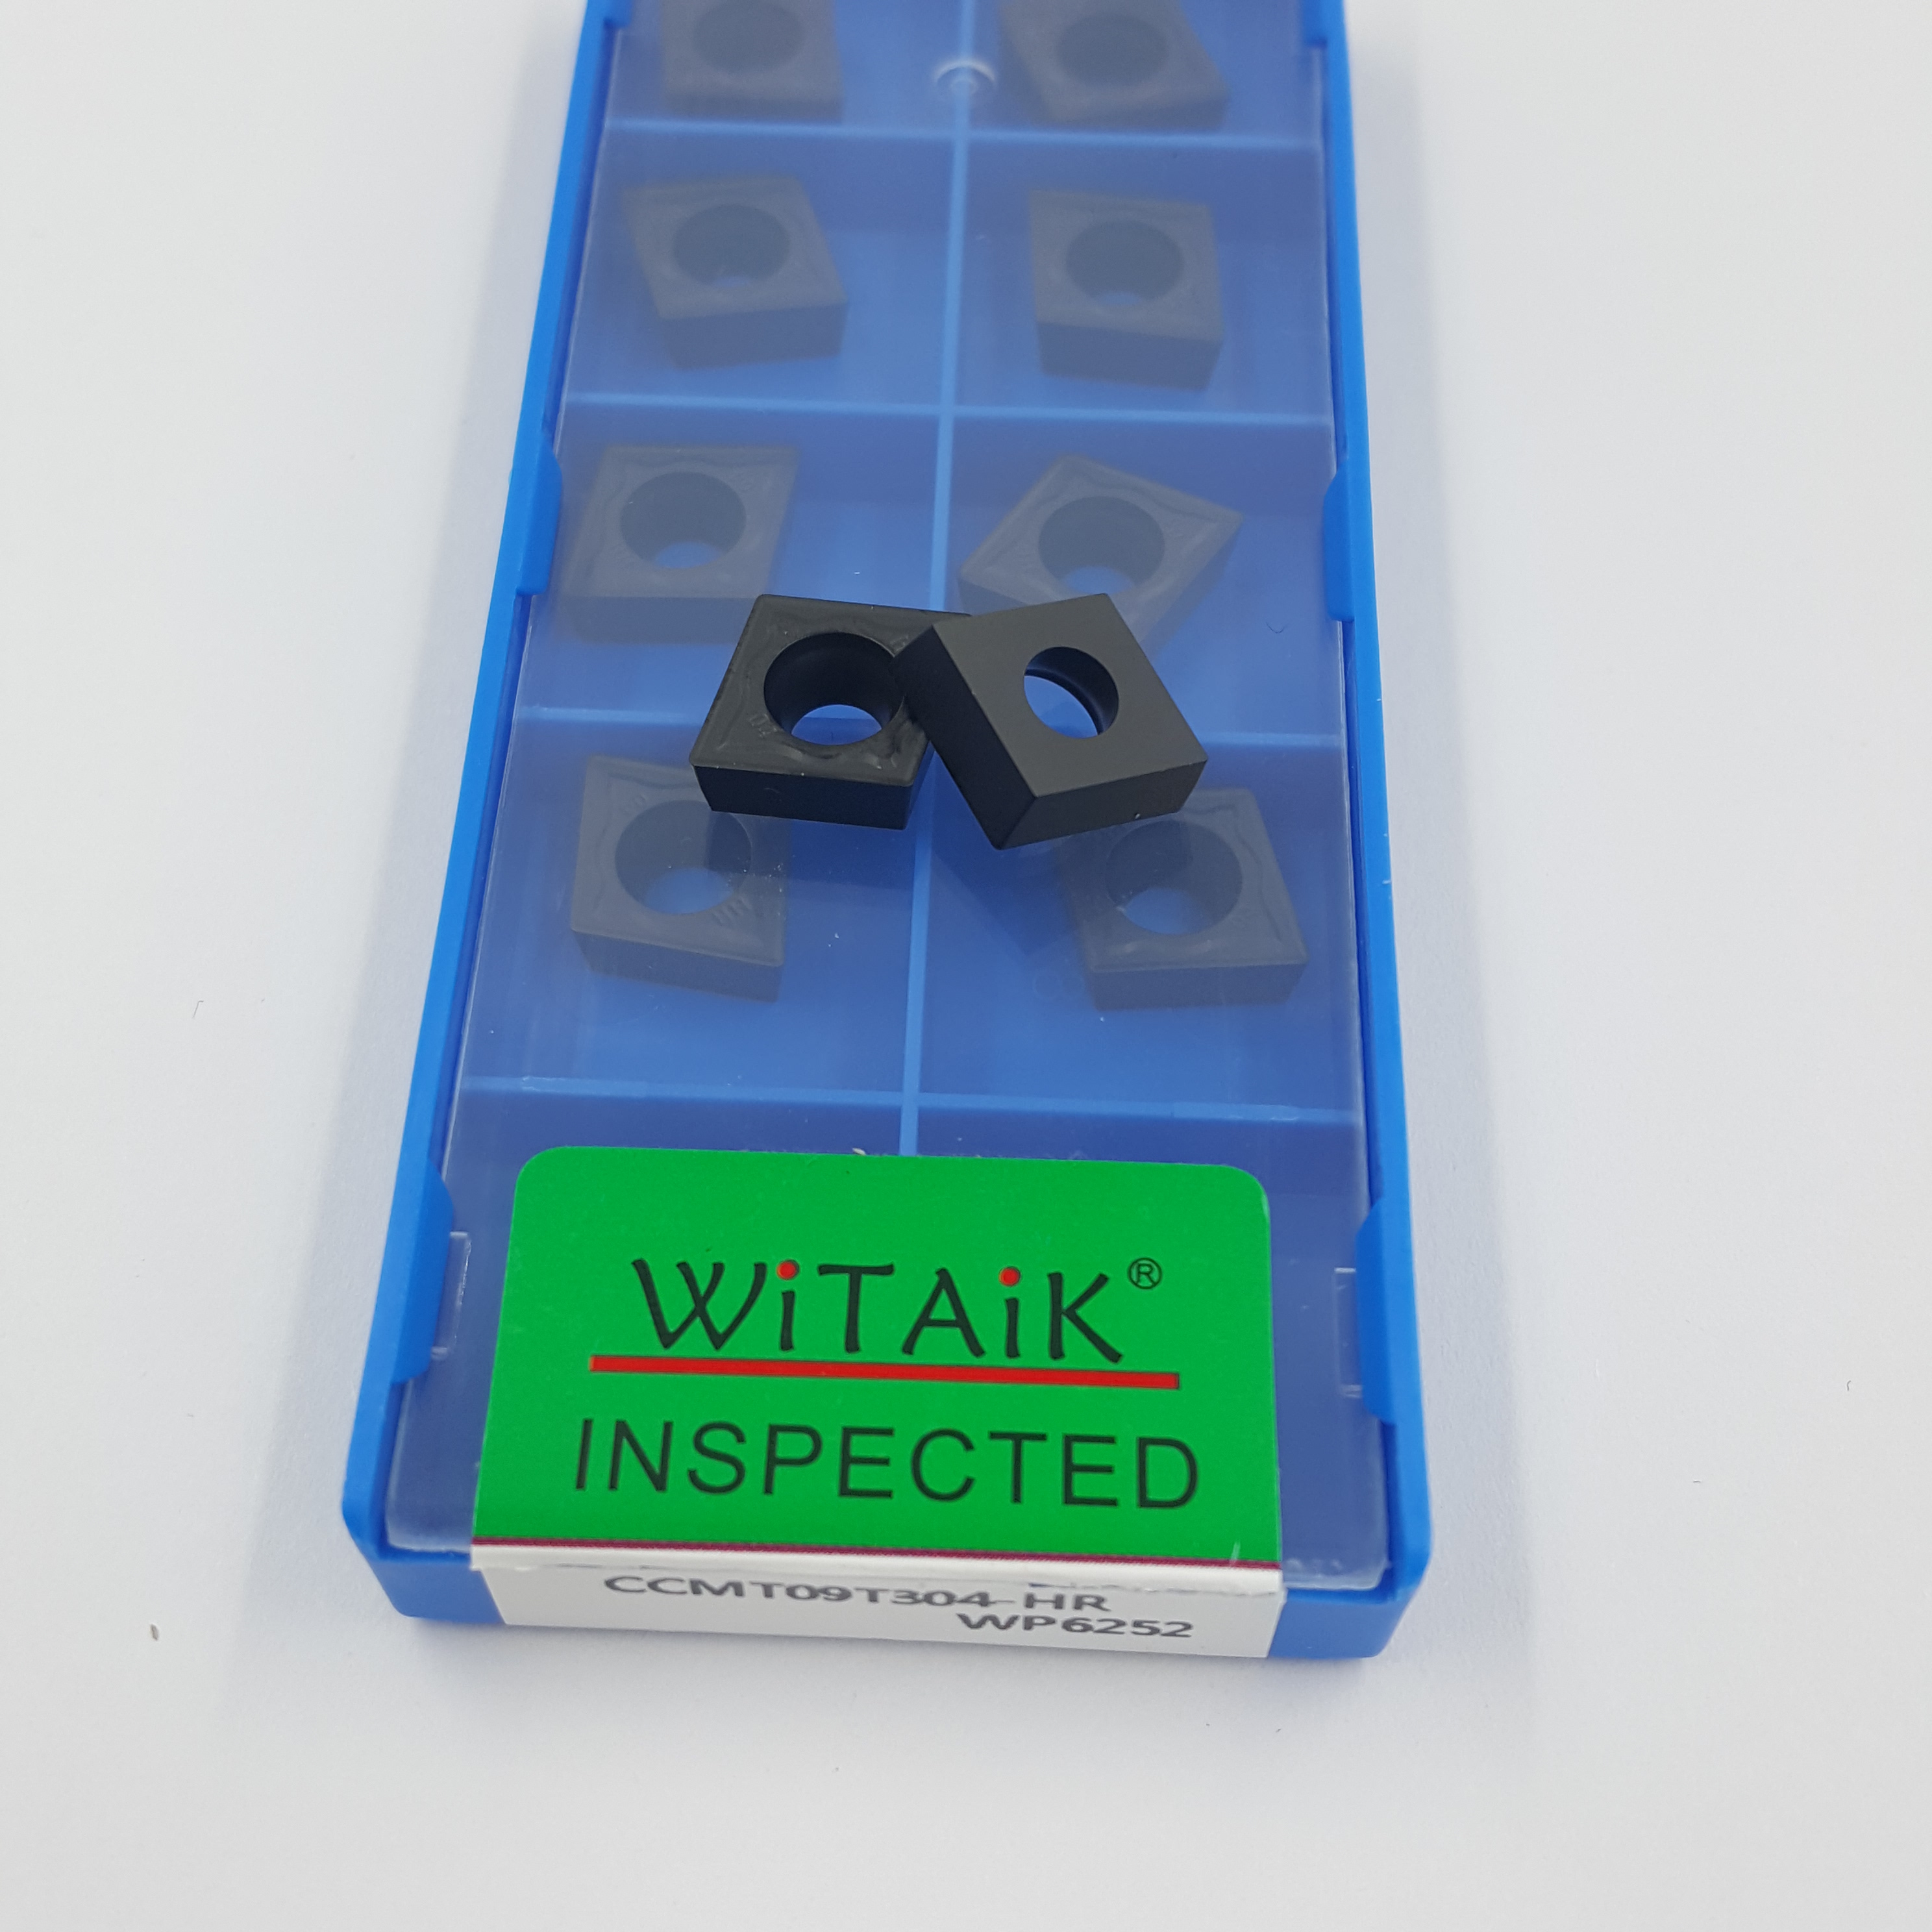 WITAIK semi-finishing turning carbide insert steel parts CCMT09T304-HR WP6252